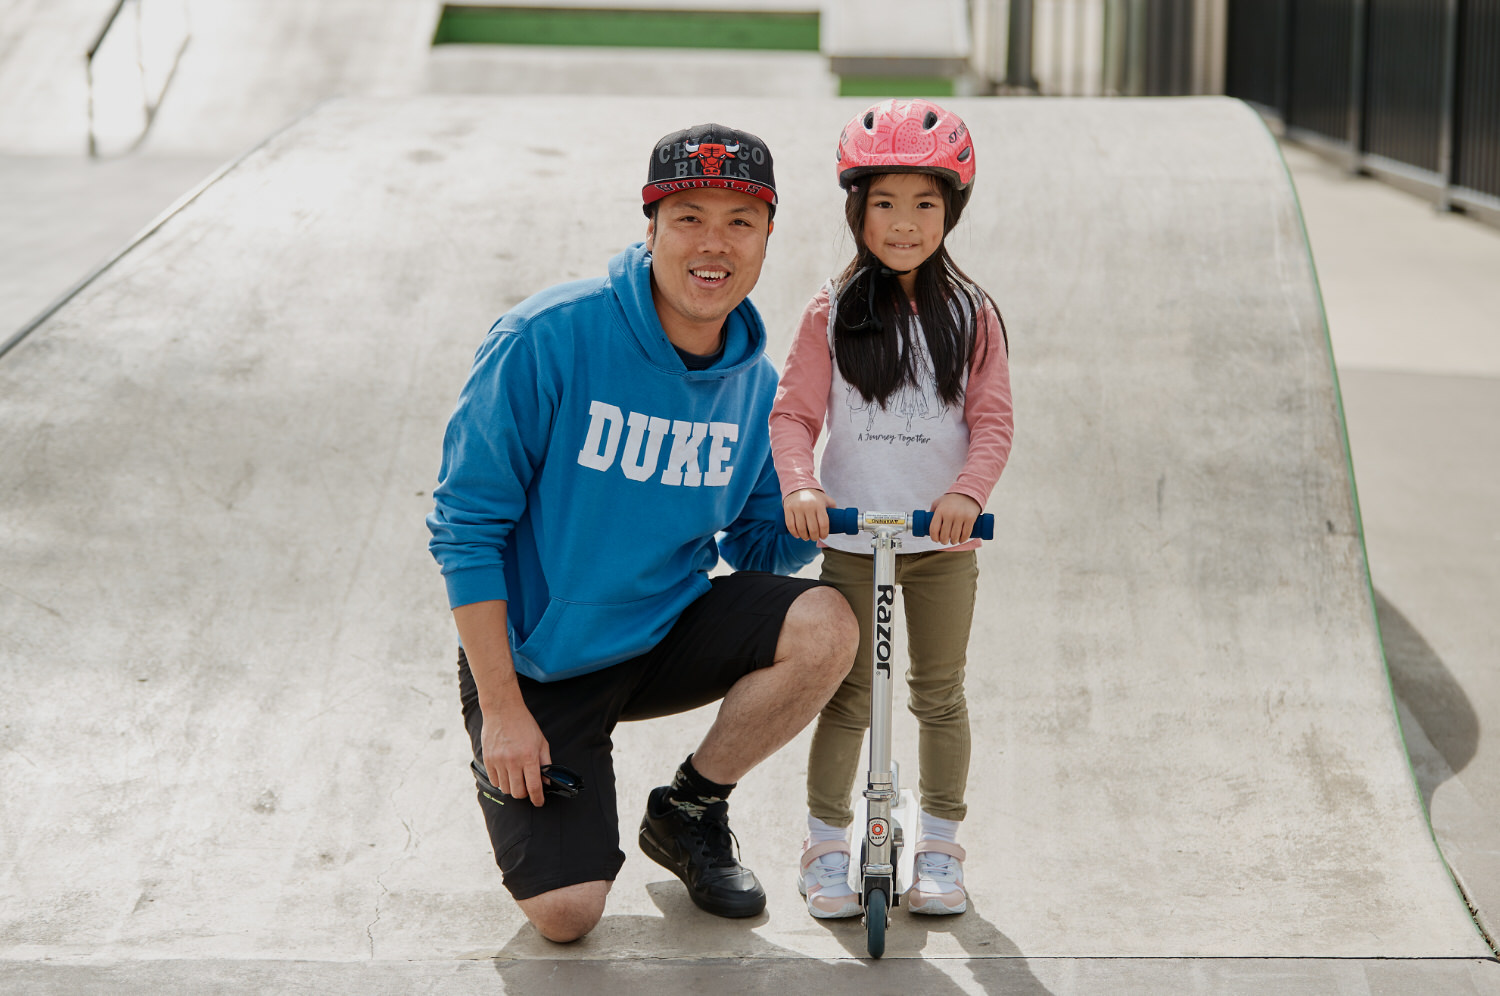 Father and daughter at skate park